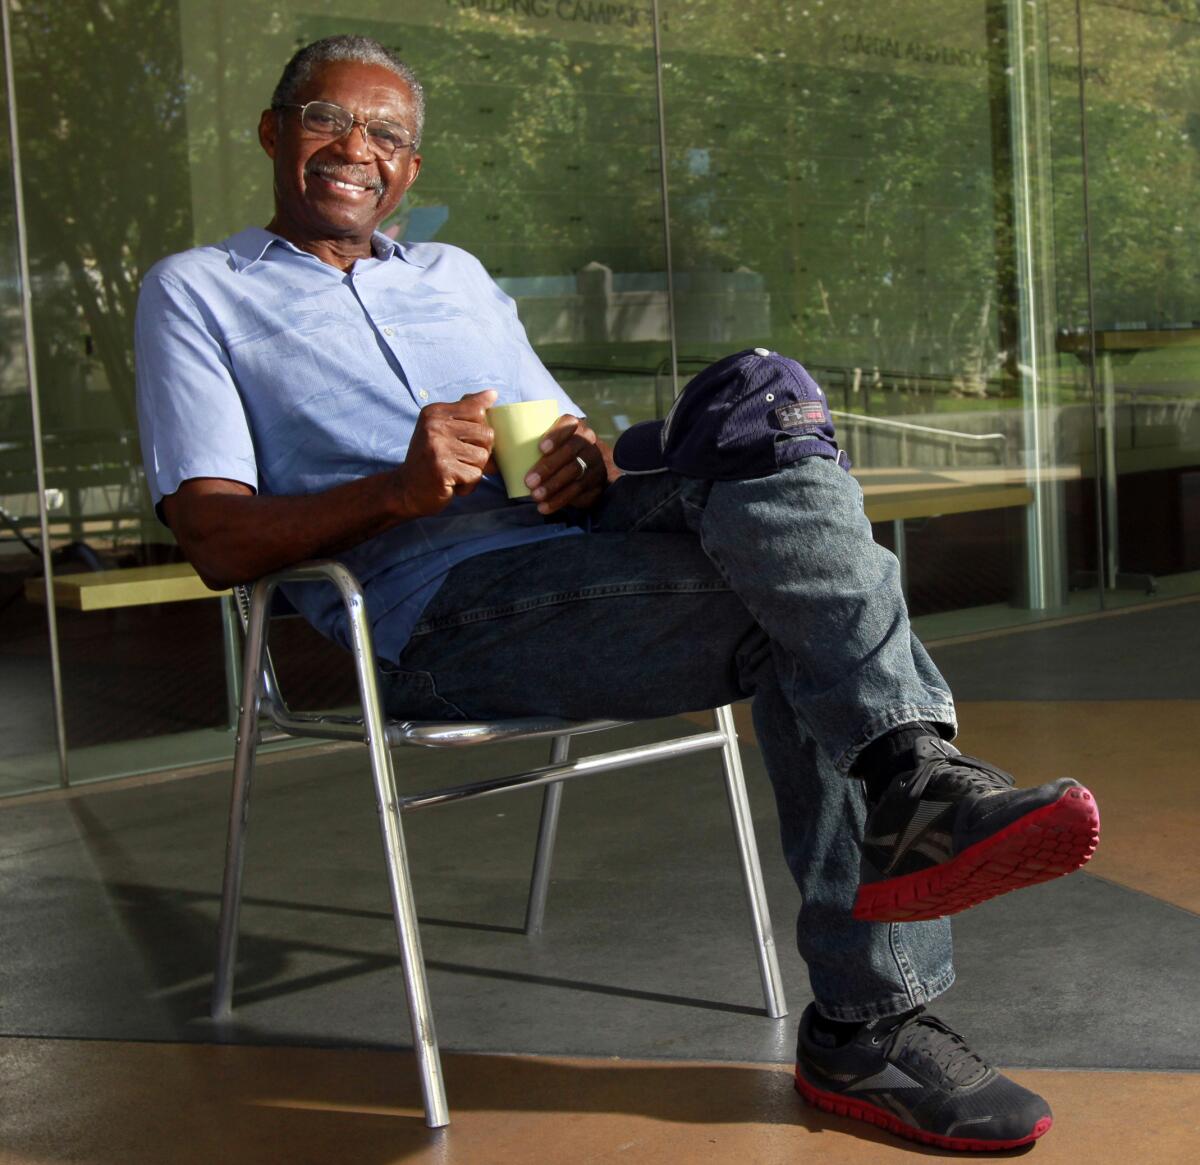 Holding a coffee cup, Charlie Robinson smiles as he leans back in a chair with his legs crossed.